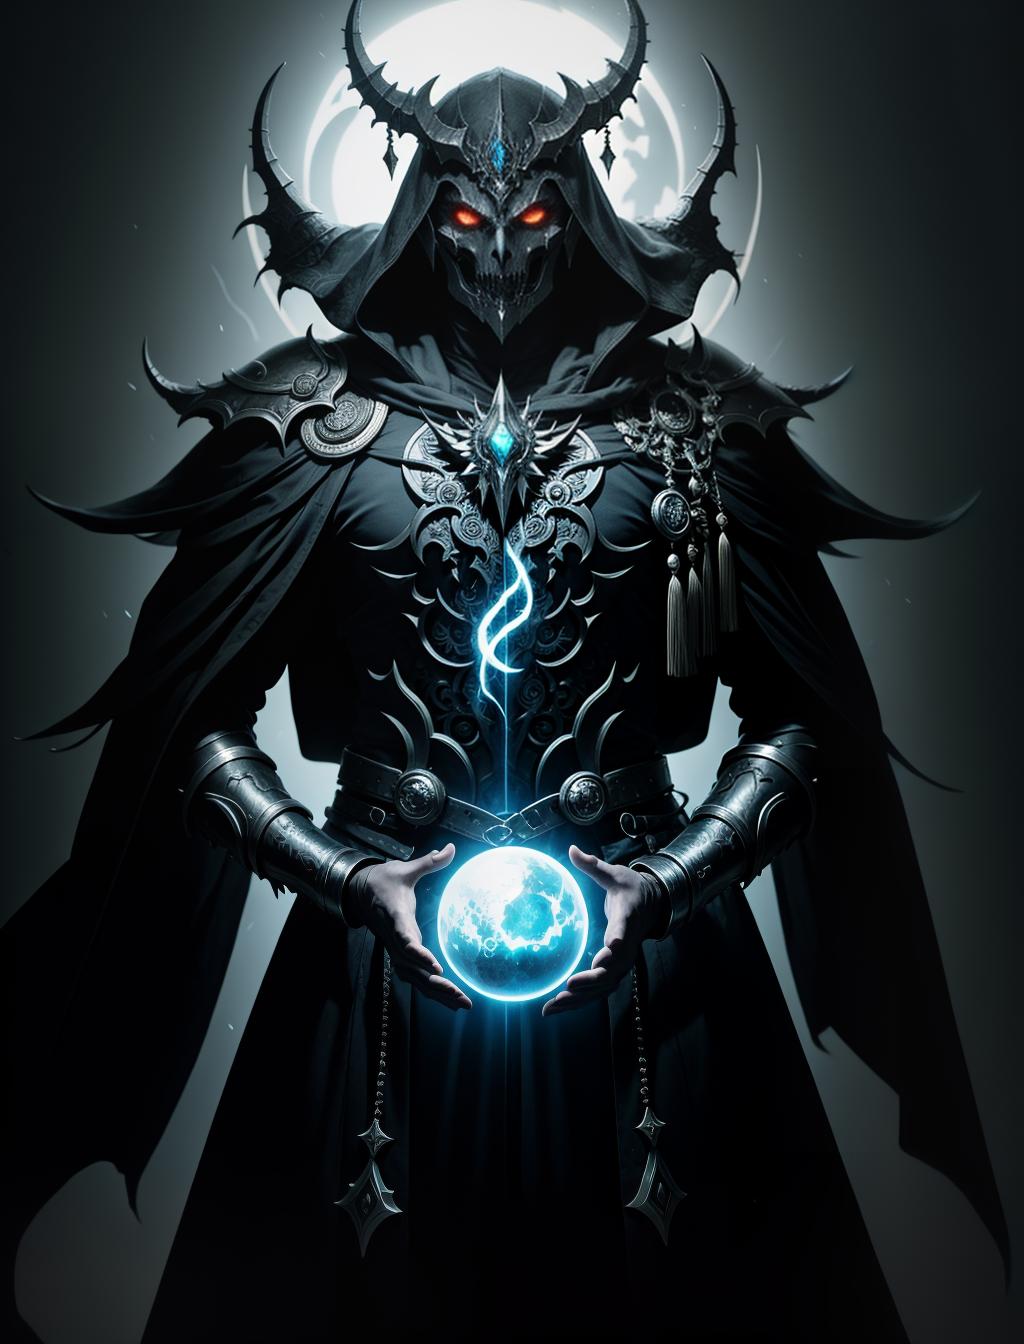  Agethle, the Enigmatic Arbiter of Chaos and Death, is portrayed in this image as an eerie and elusive deity of Chaotic Neutral alignment. He exists as a spectral, luminous orb radiating an unsettling dark hue, shrouded in a haunting aura of pure chaos.